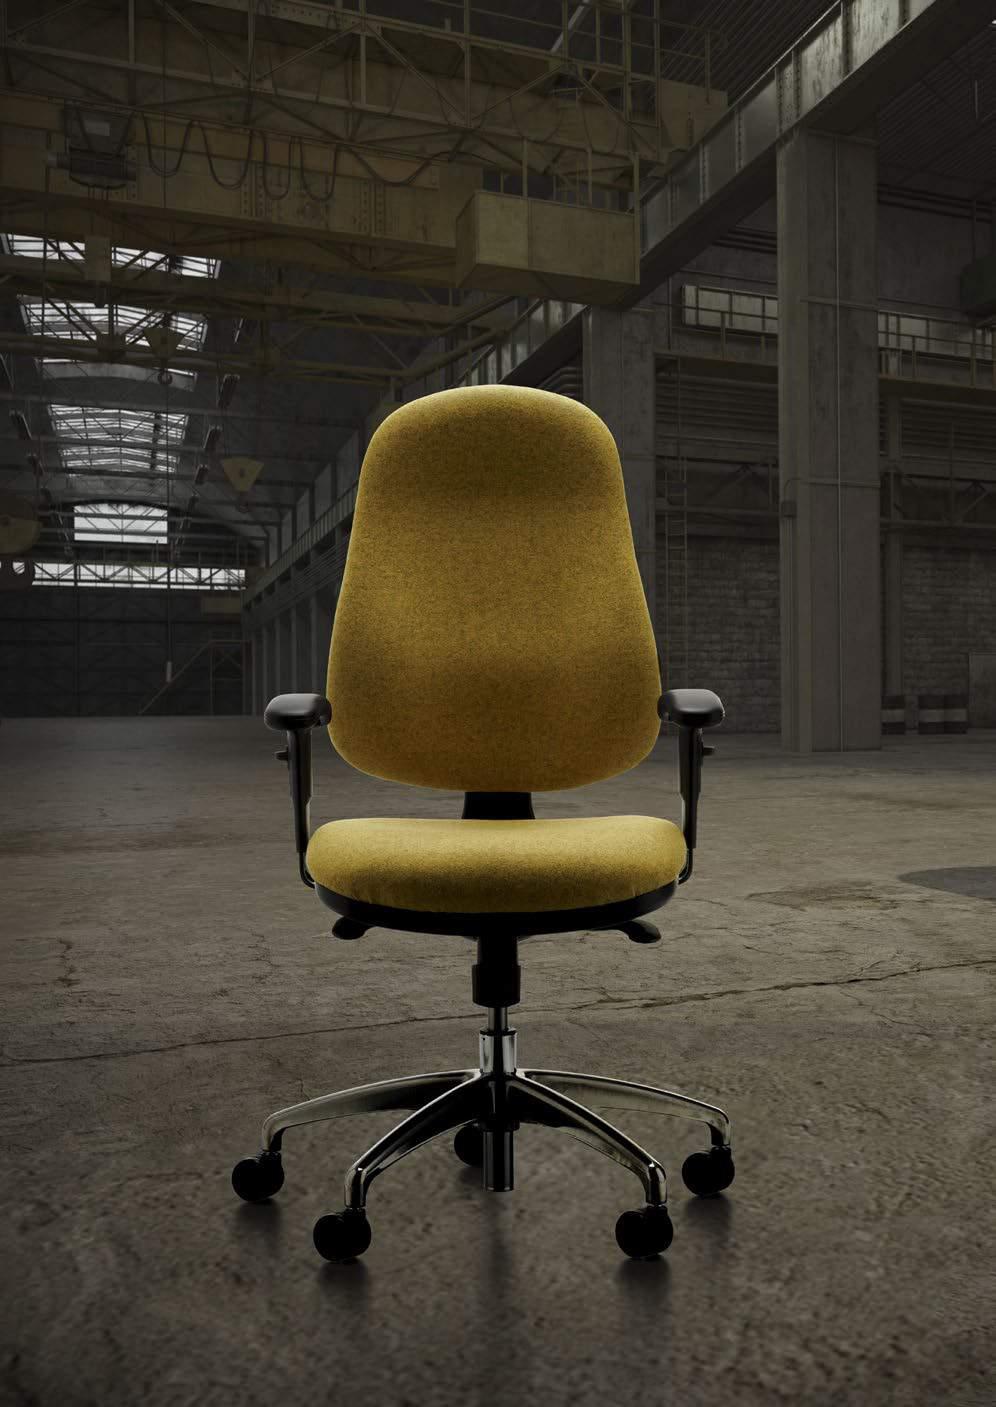 Buzz_ Work seating designed by Verco Buzz offers a new concept in operator seating, combining aesthetics, ergonomics